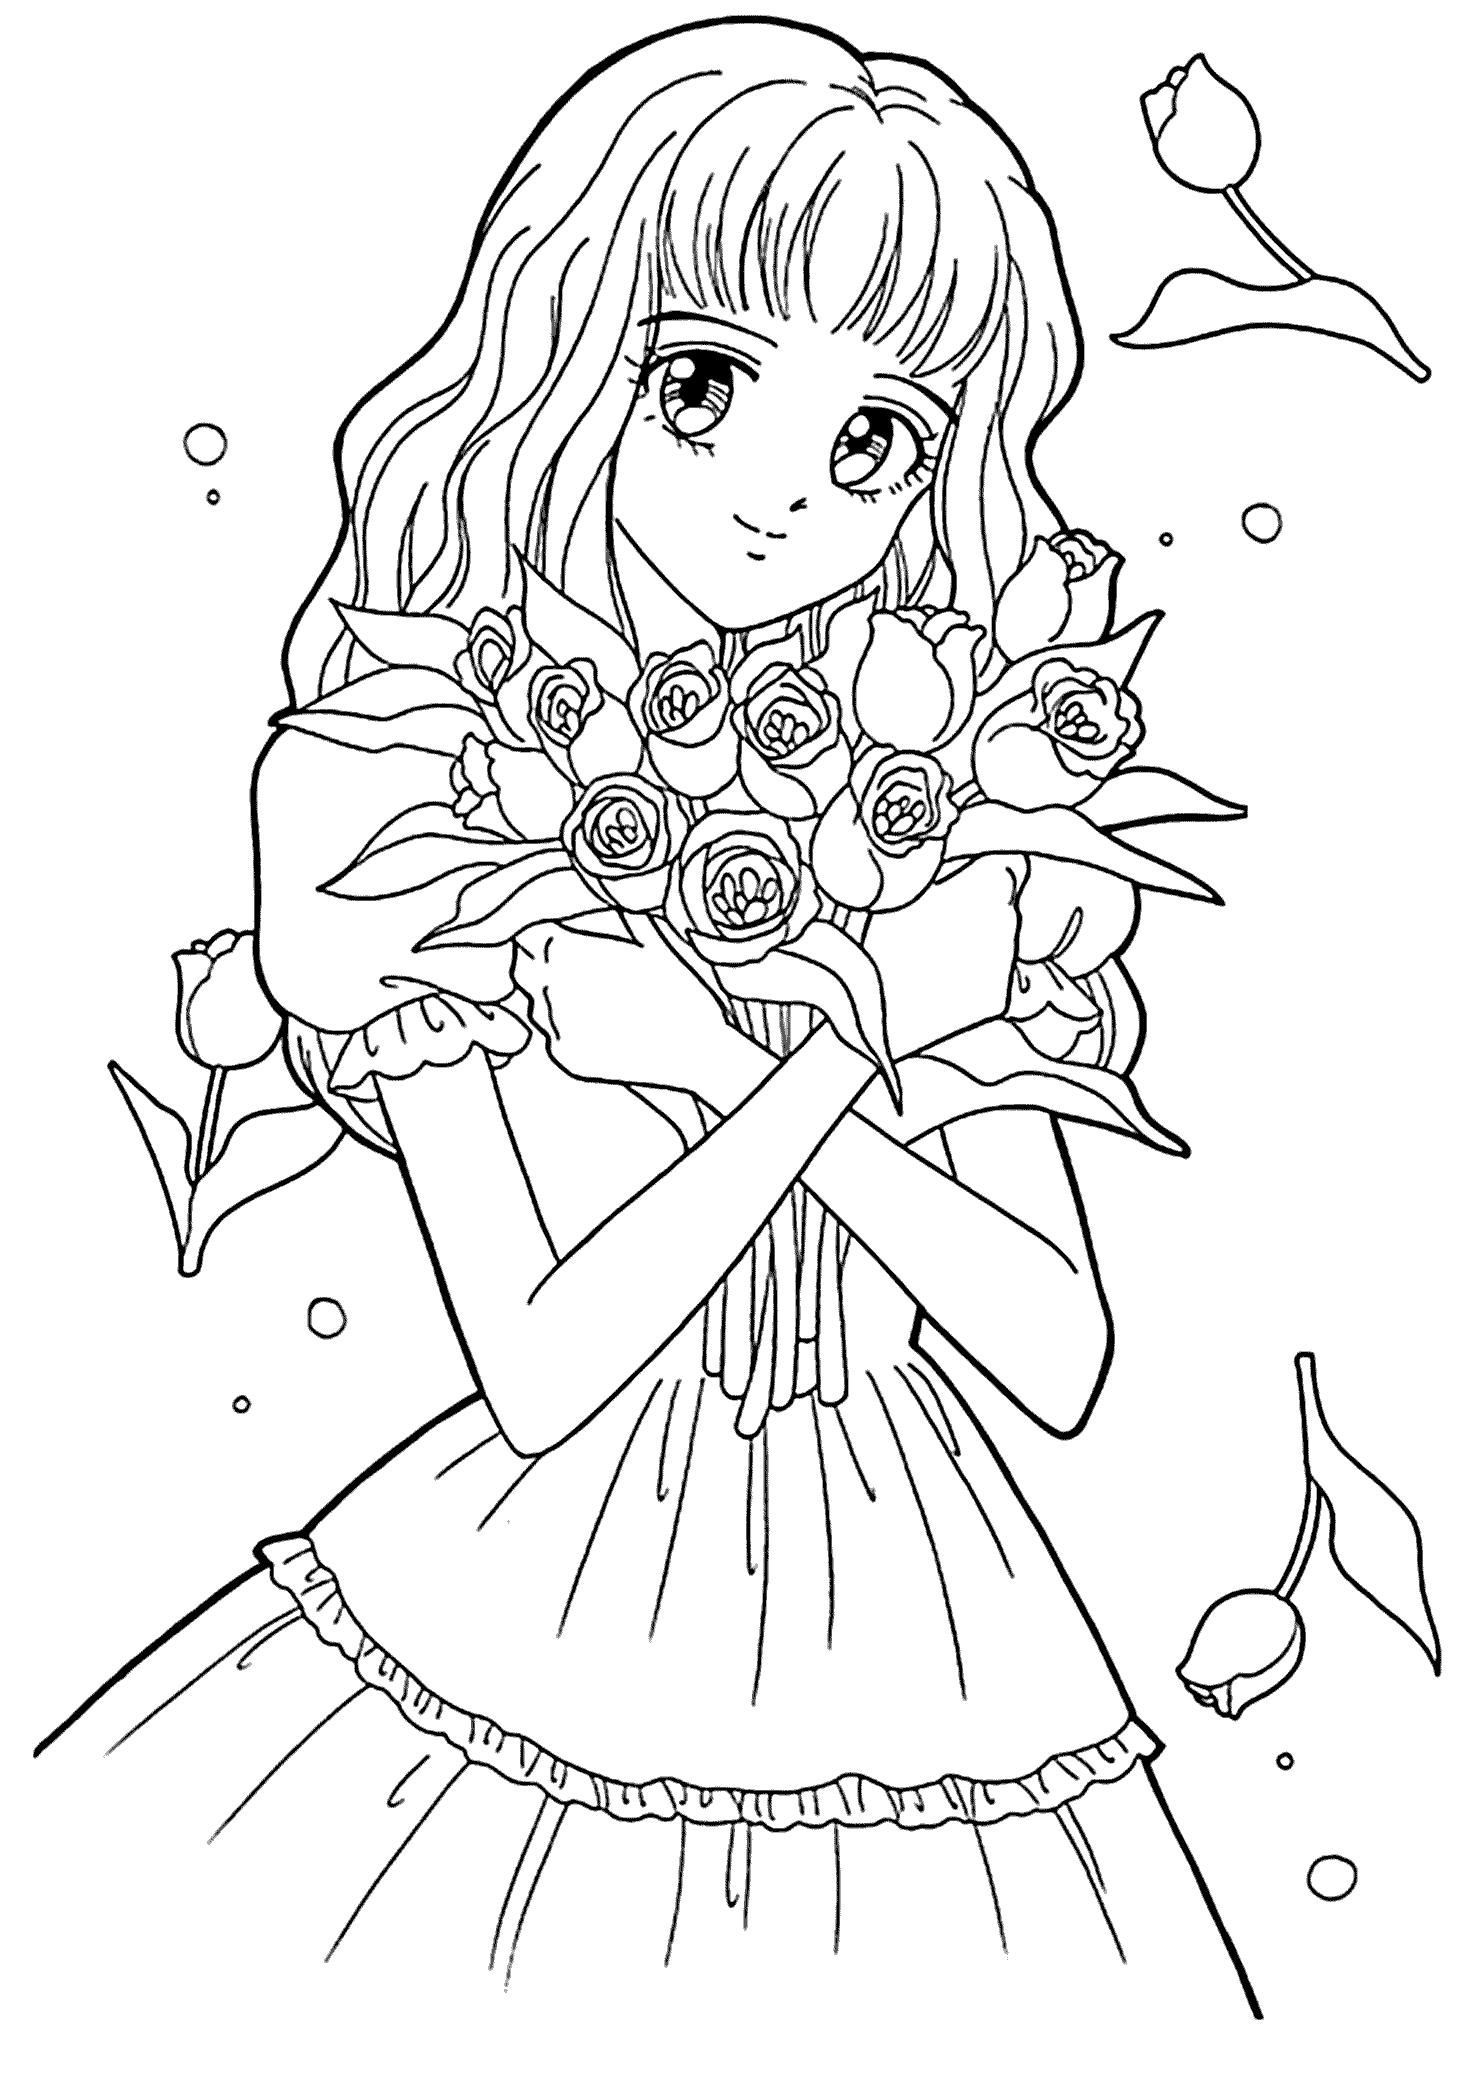 Anime Cartoon Coloring Pages at GetColorings.com | Free printable ...